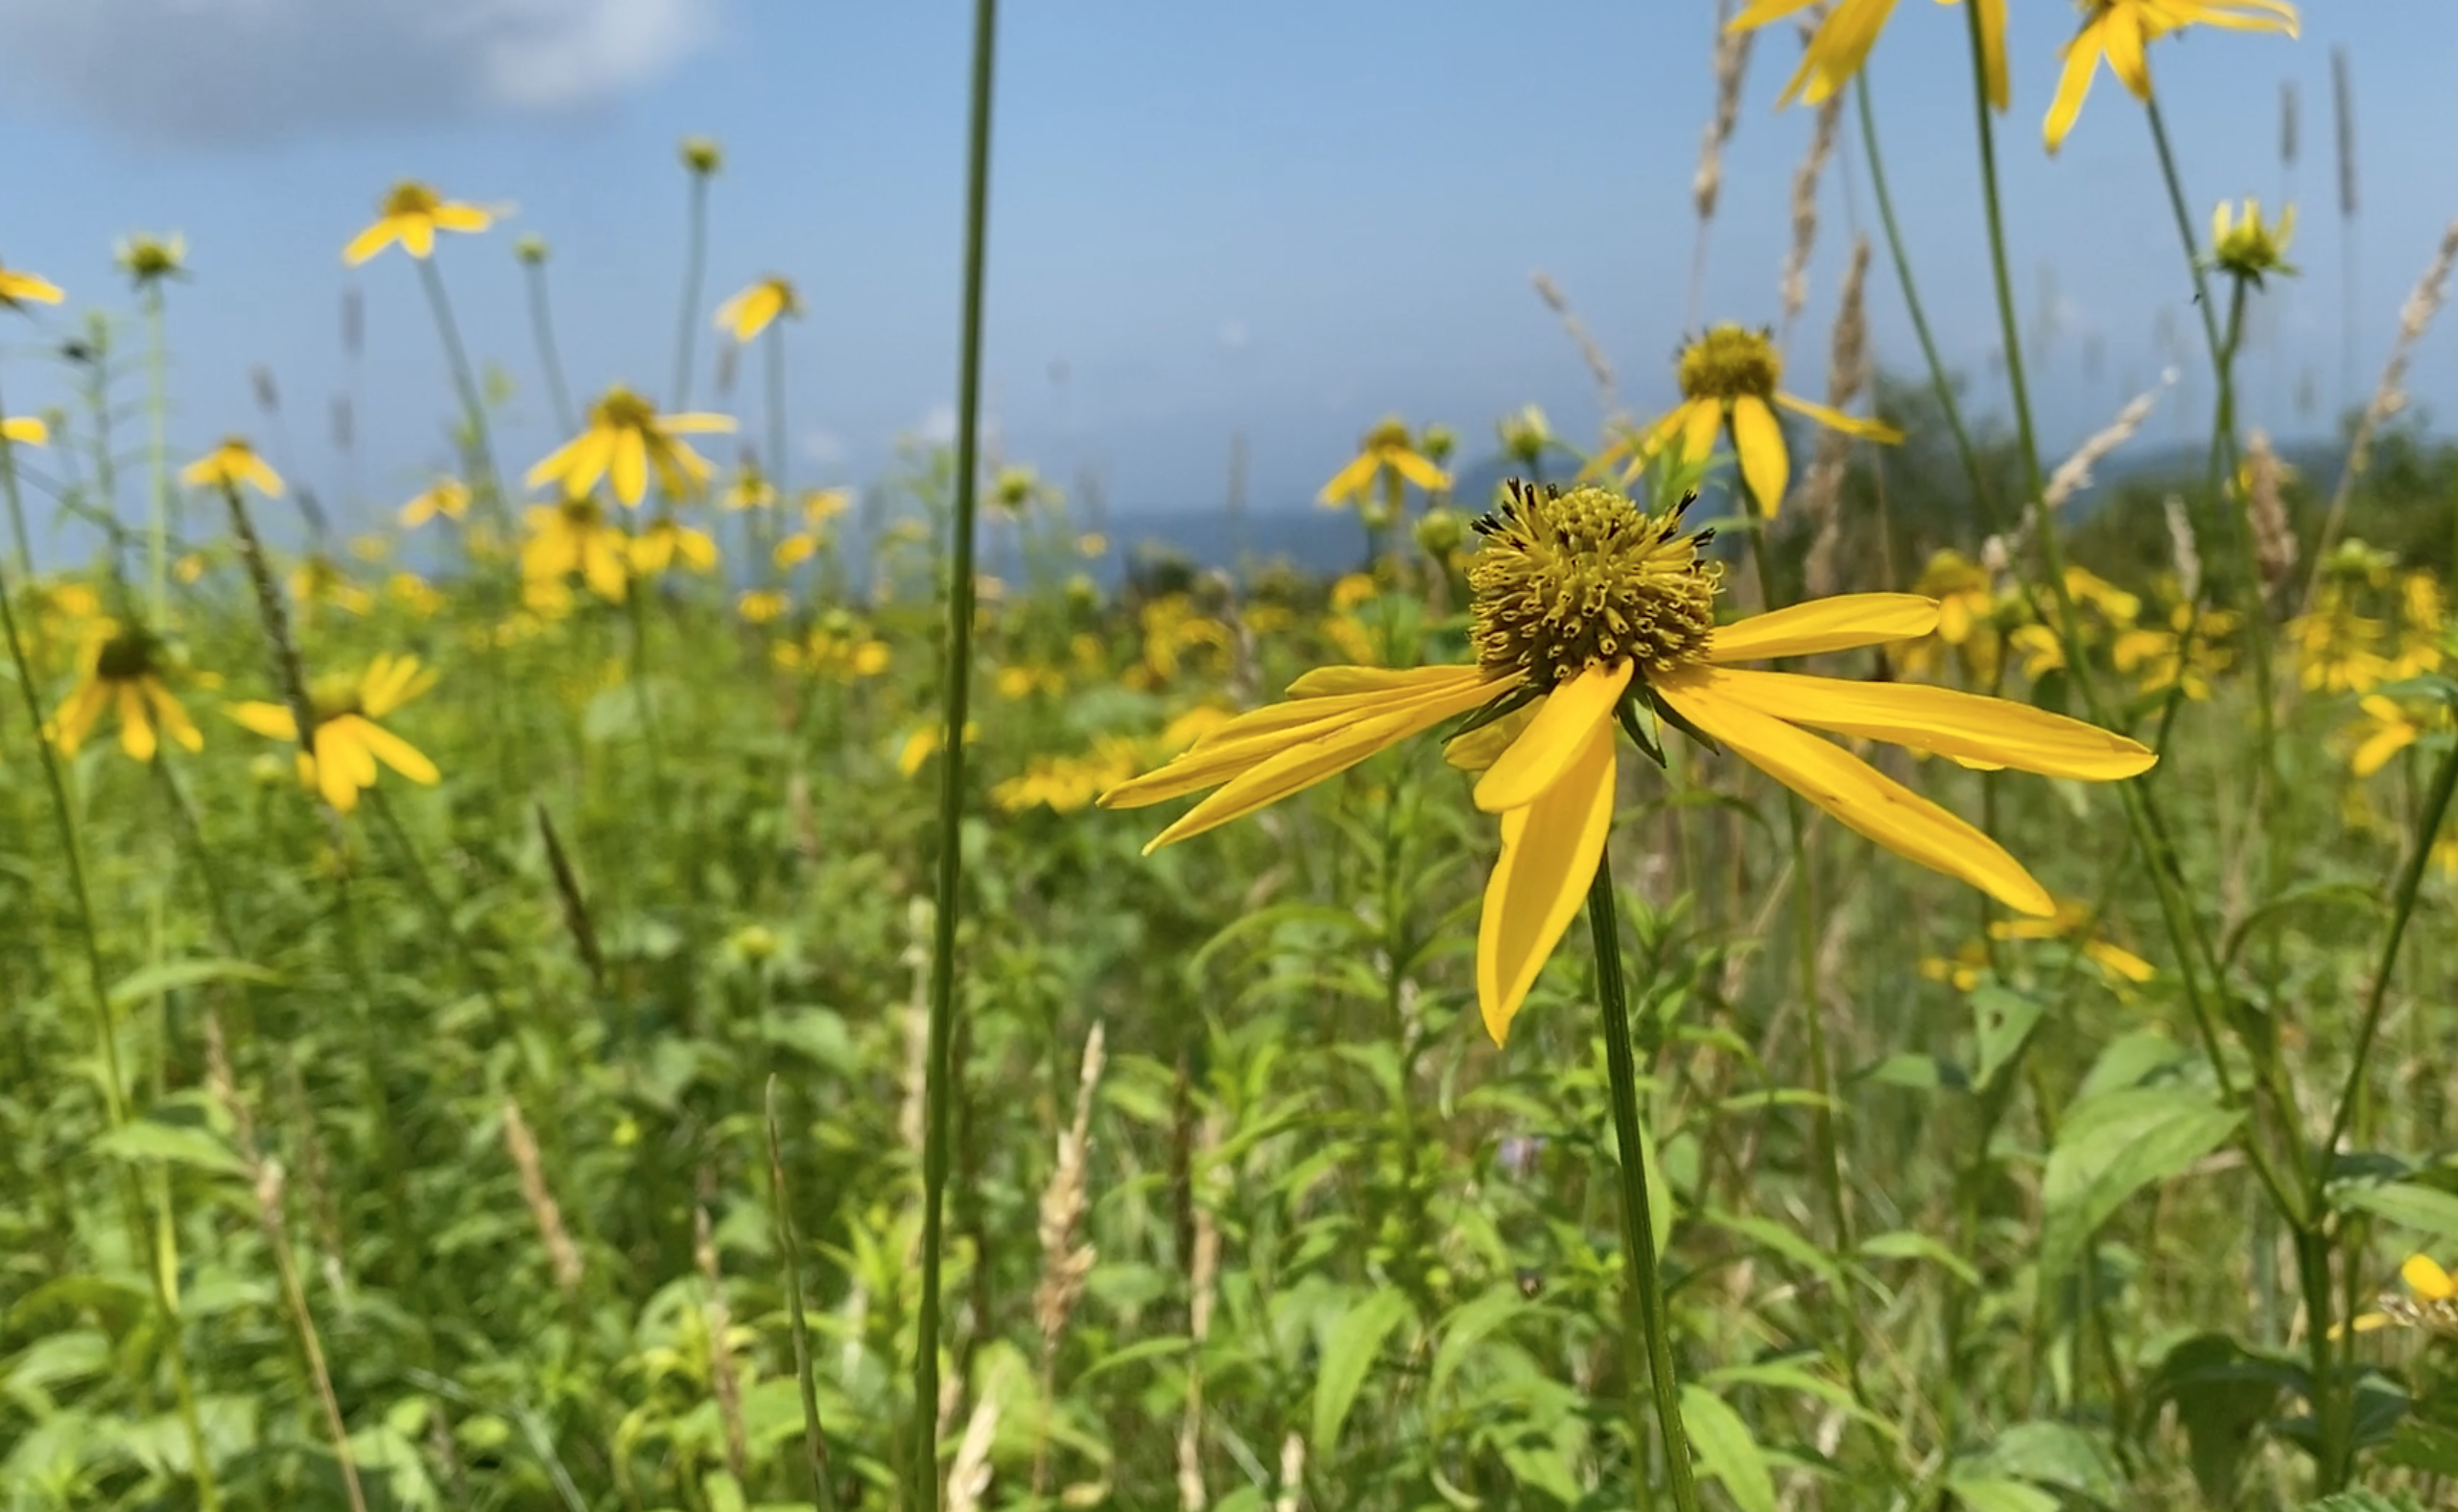 Rudbeckia triloba, Brown-Eyed Susan, blooms bright yellow flowers amongst the lush green grasslands of Whiggs Meadow in Tellico Plains of Tennessee.